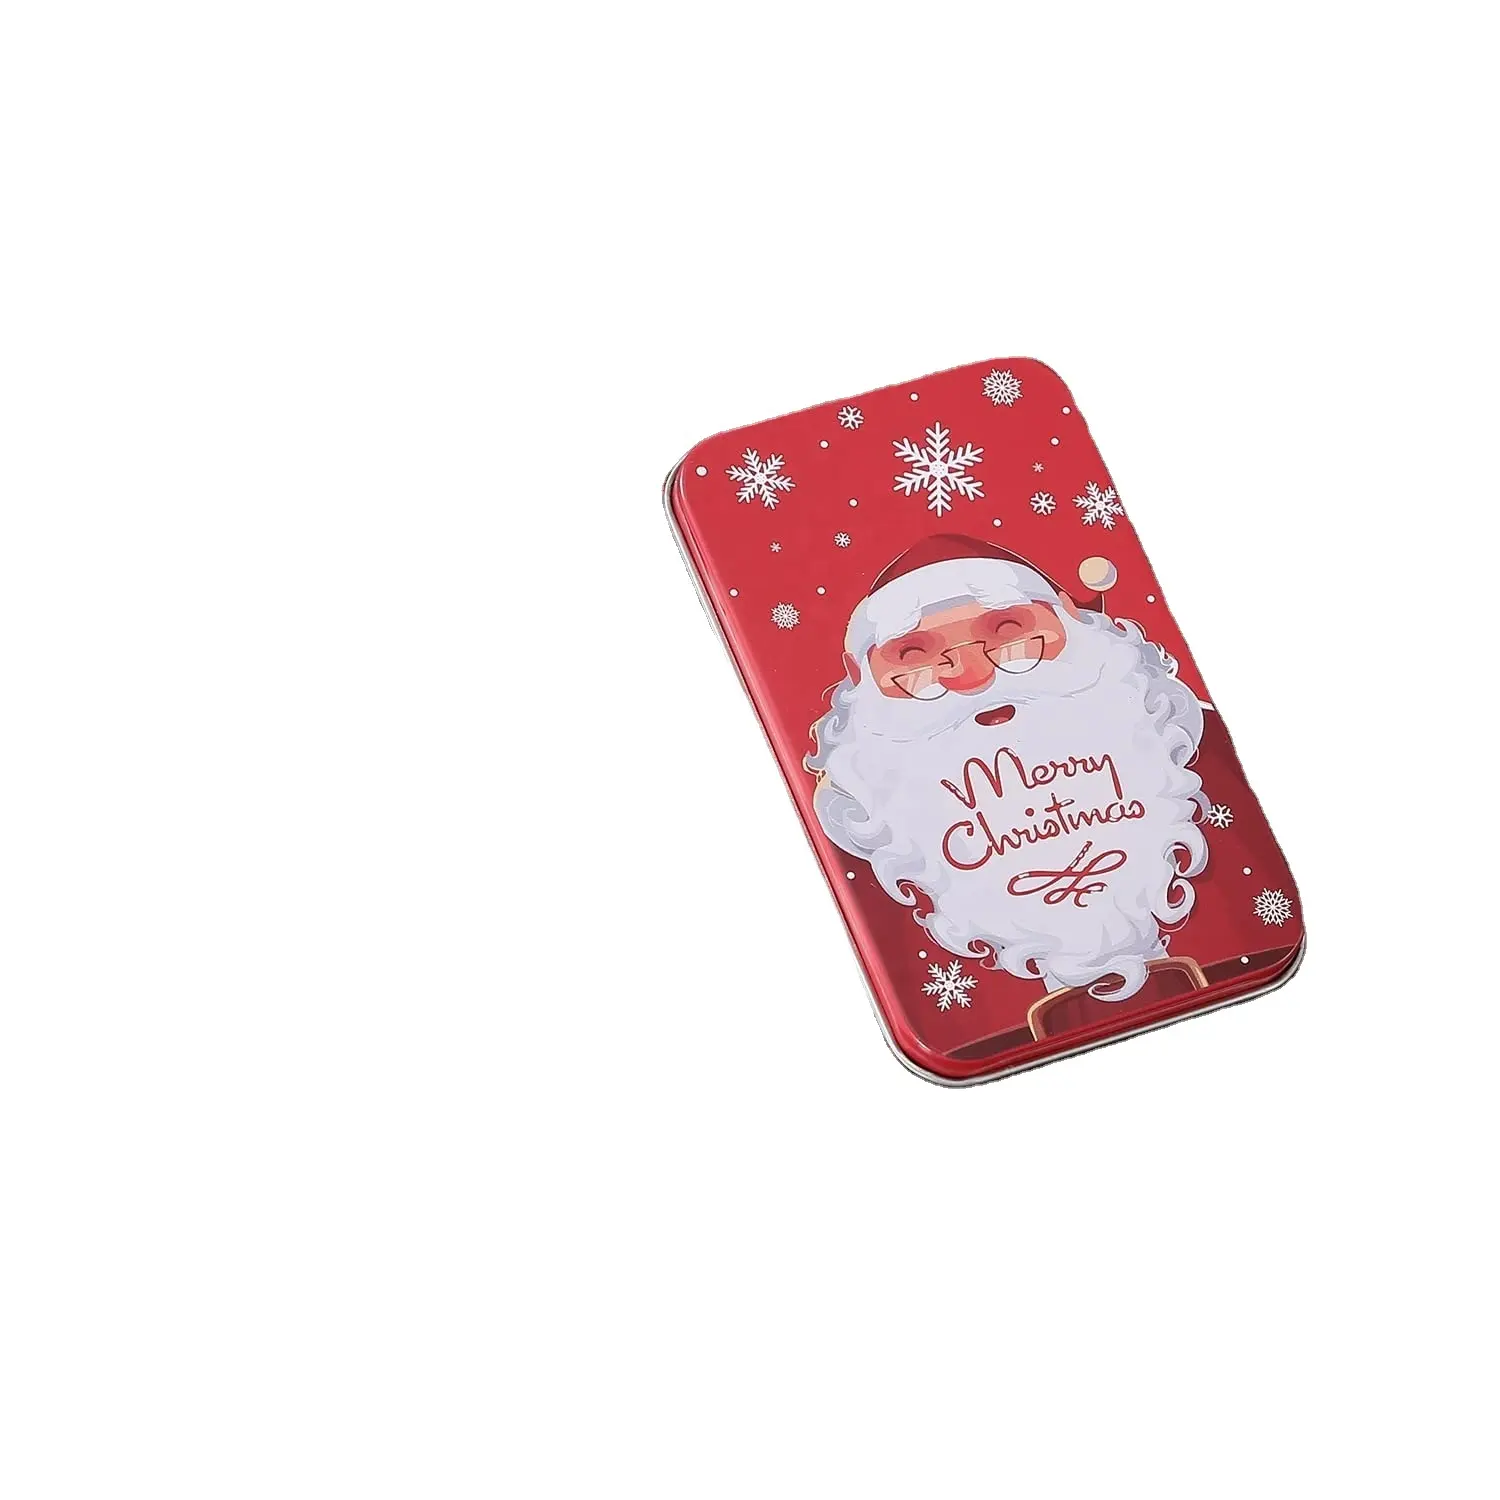 Tin Gift Card Holder Container Metal Crafts Solid Case Small StorageTin Boxes for Christmas FOR Cards Money Keys Gift Card Tin